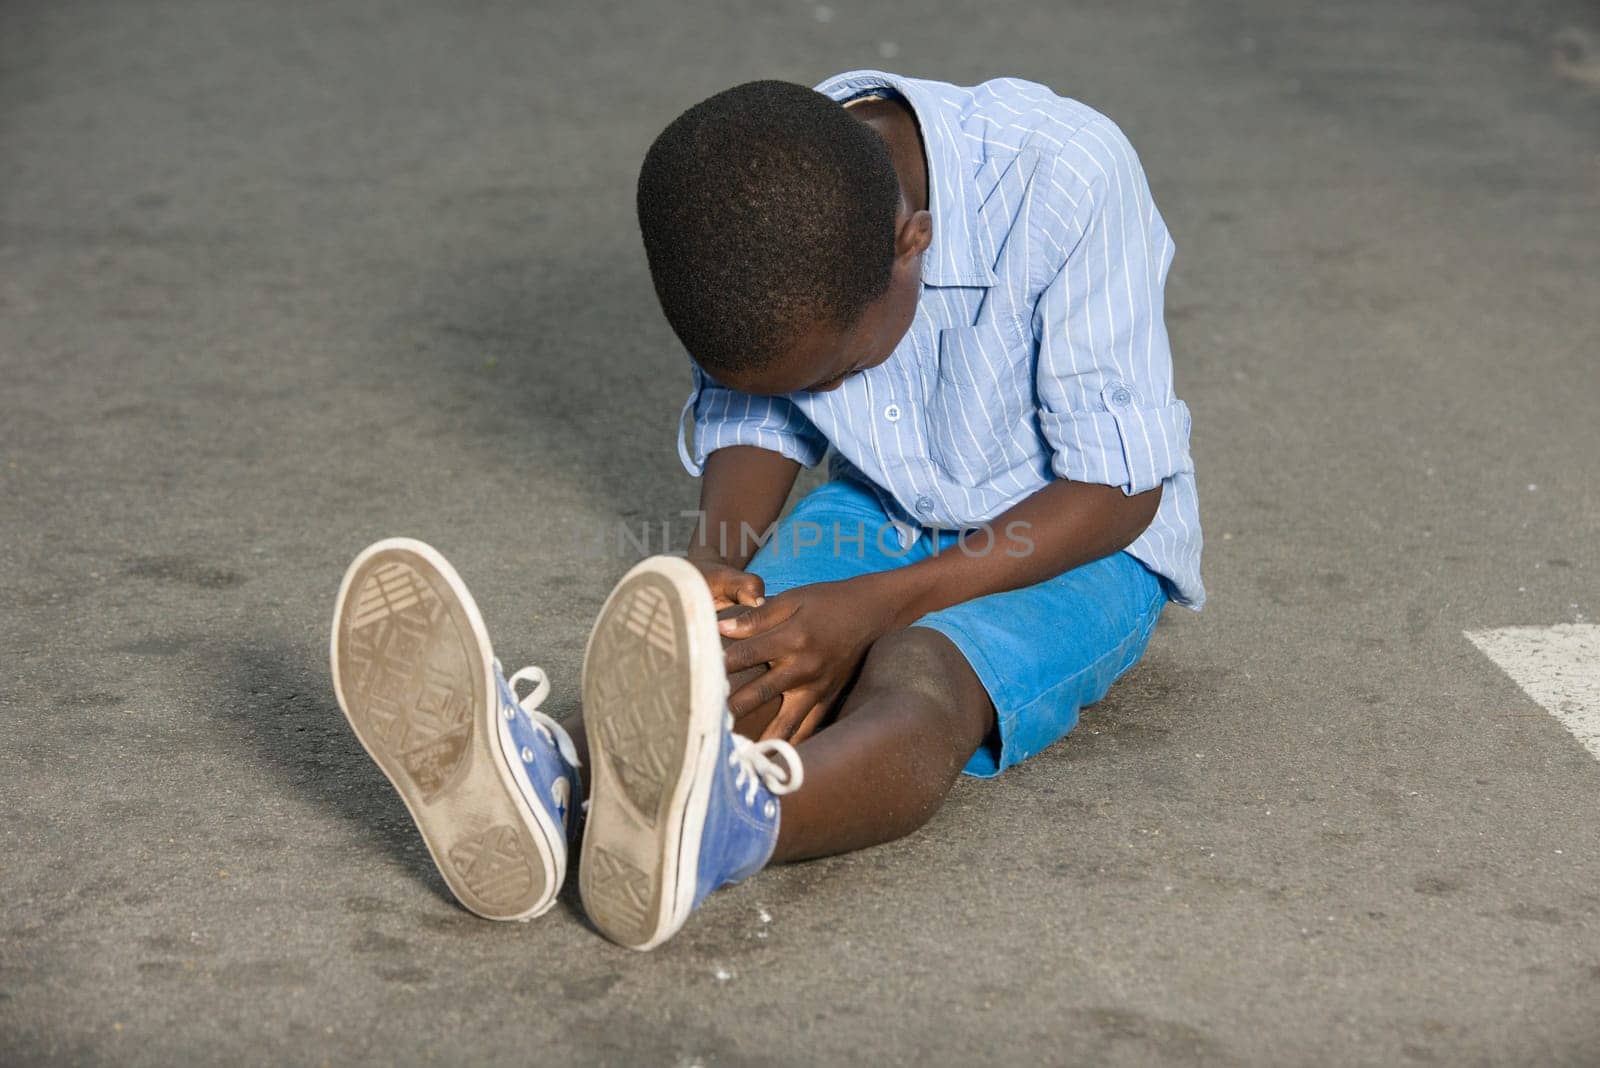 Little boy falling and crying on the road. child sitting alone in the middle of the road with knee ache and waiting for help looking at his injury